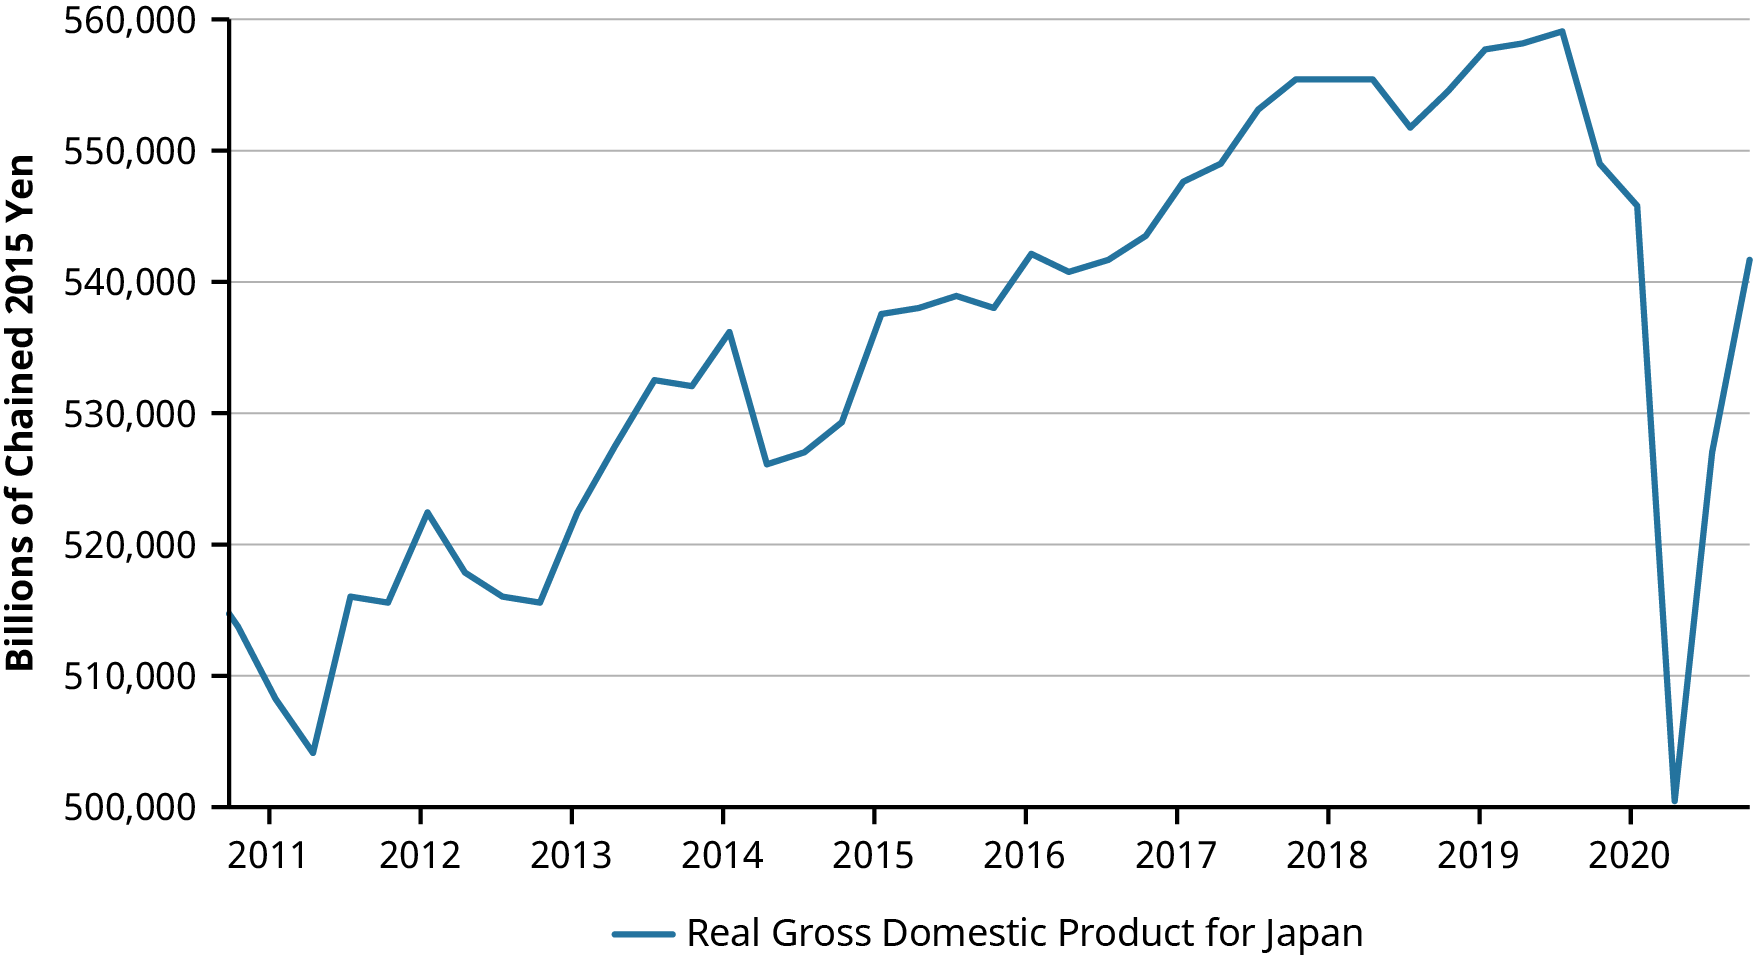 Graphical representation of the Real Gross Domestic Product for Japan, 2010–2020. It shows that the real GDP for Japan kept on rising from 2011 to 2019, then dropped dramatically in 2020 before it dramatically rose again.